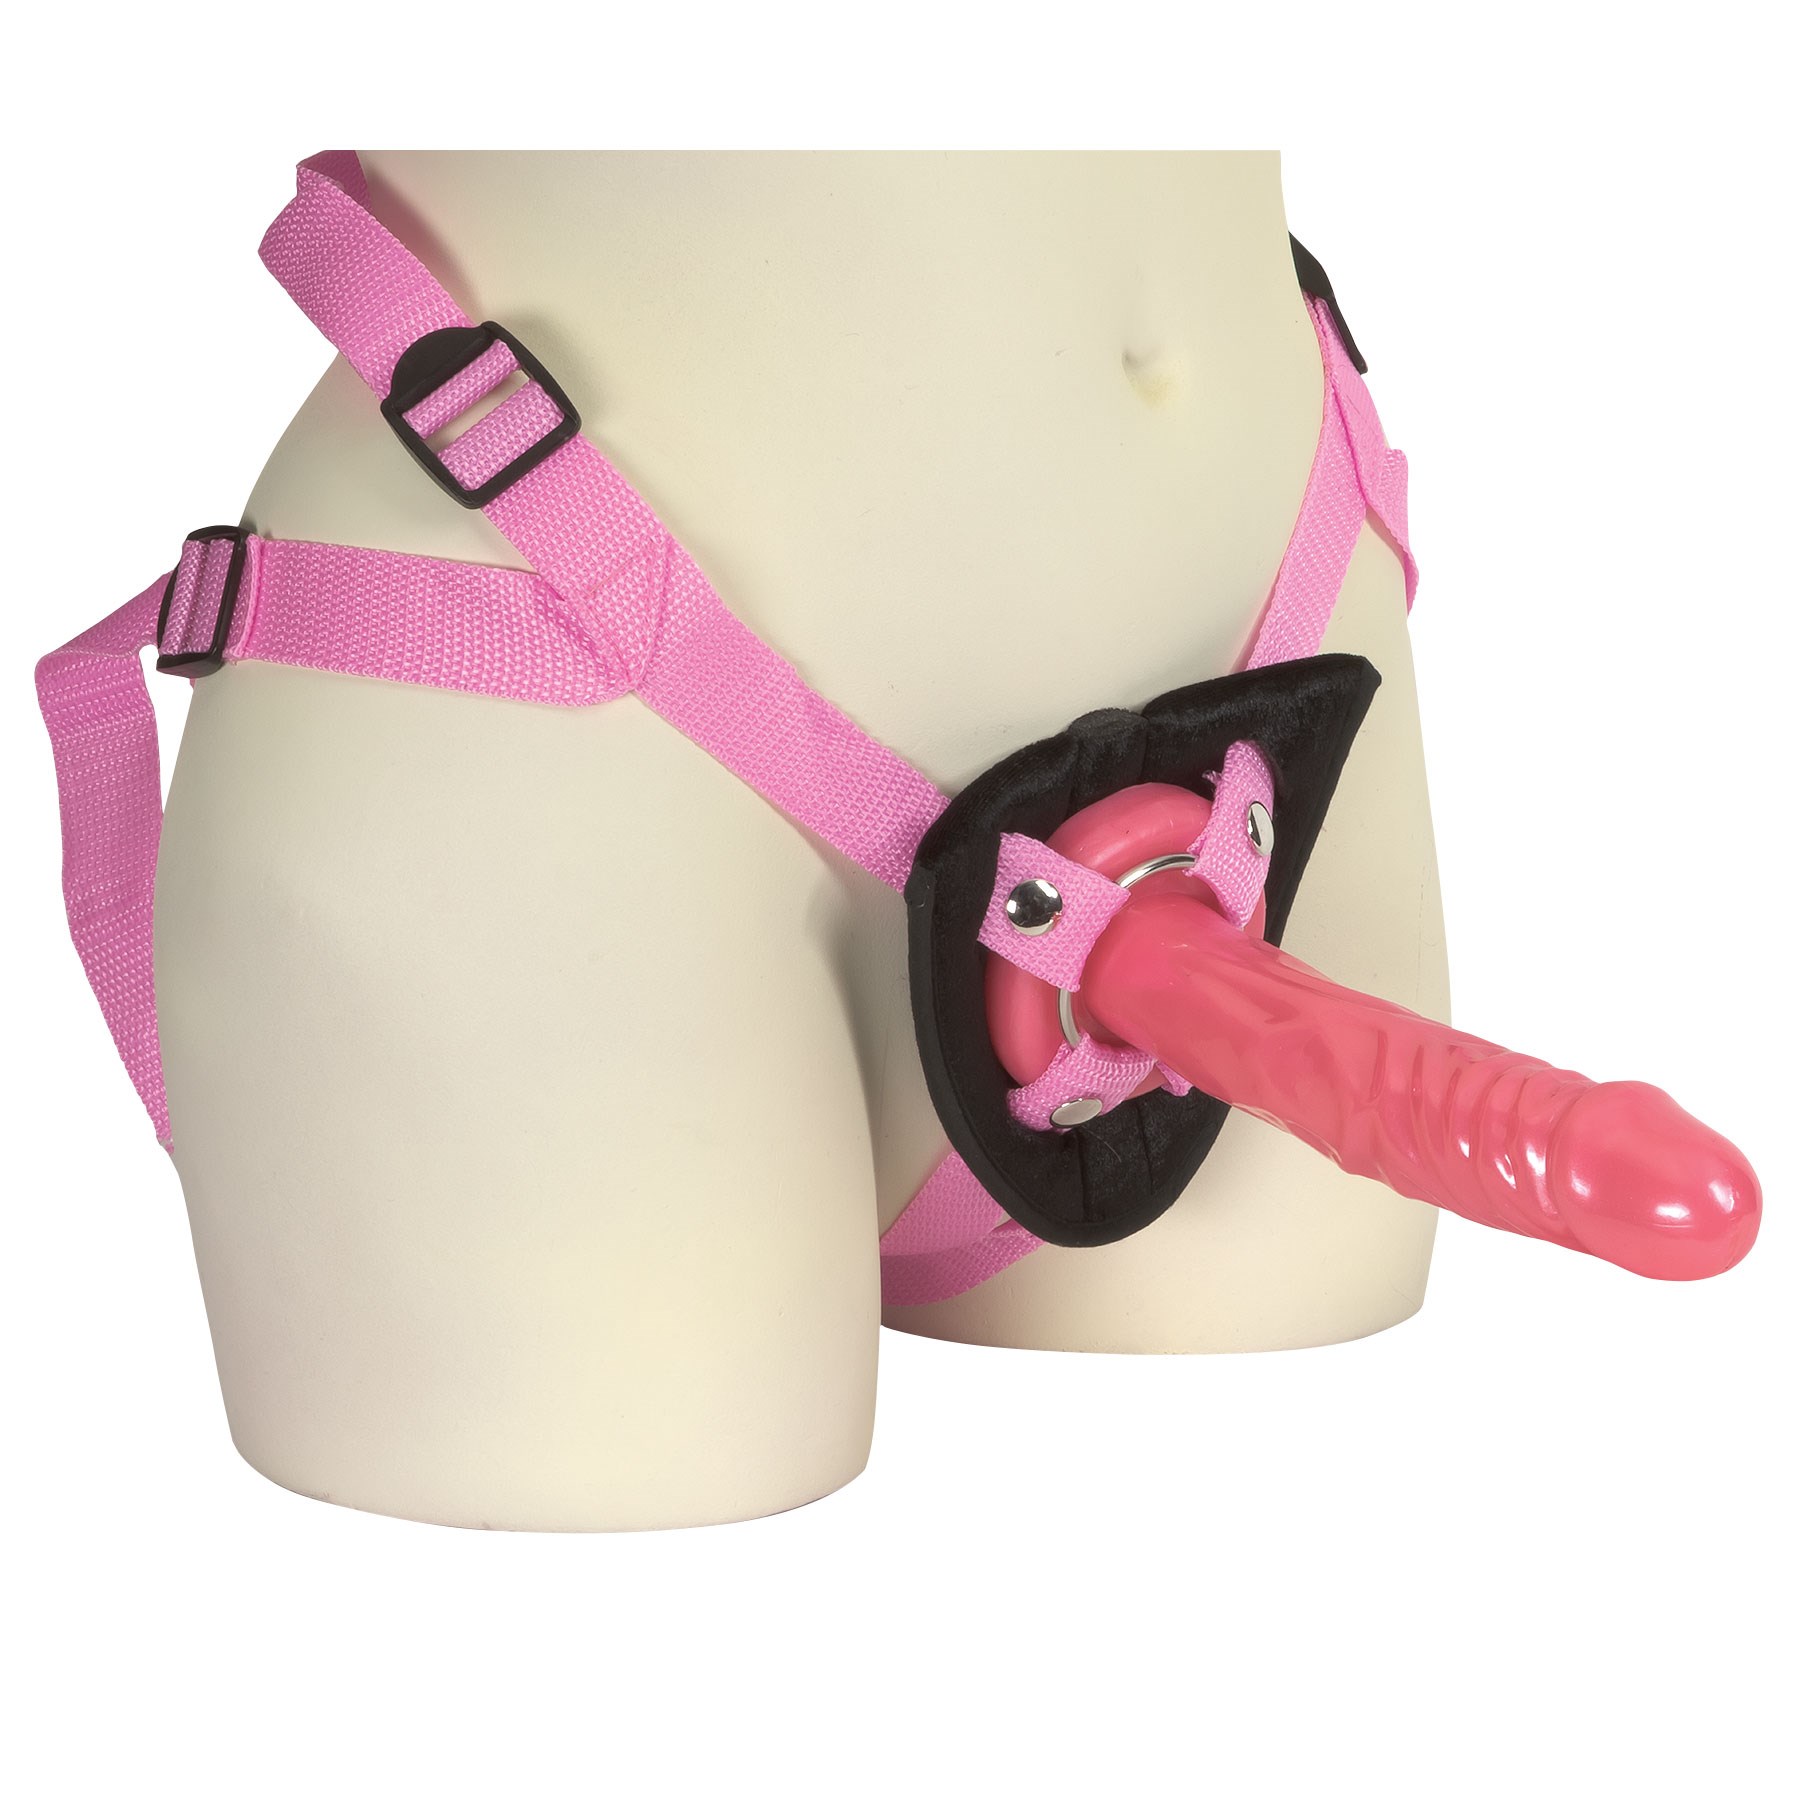 pink harness with stud